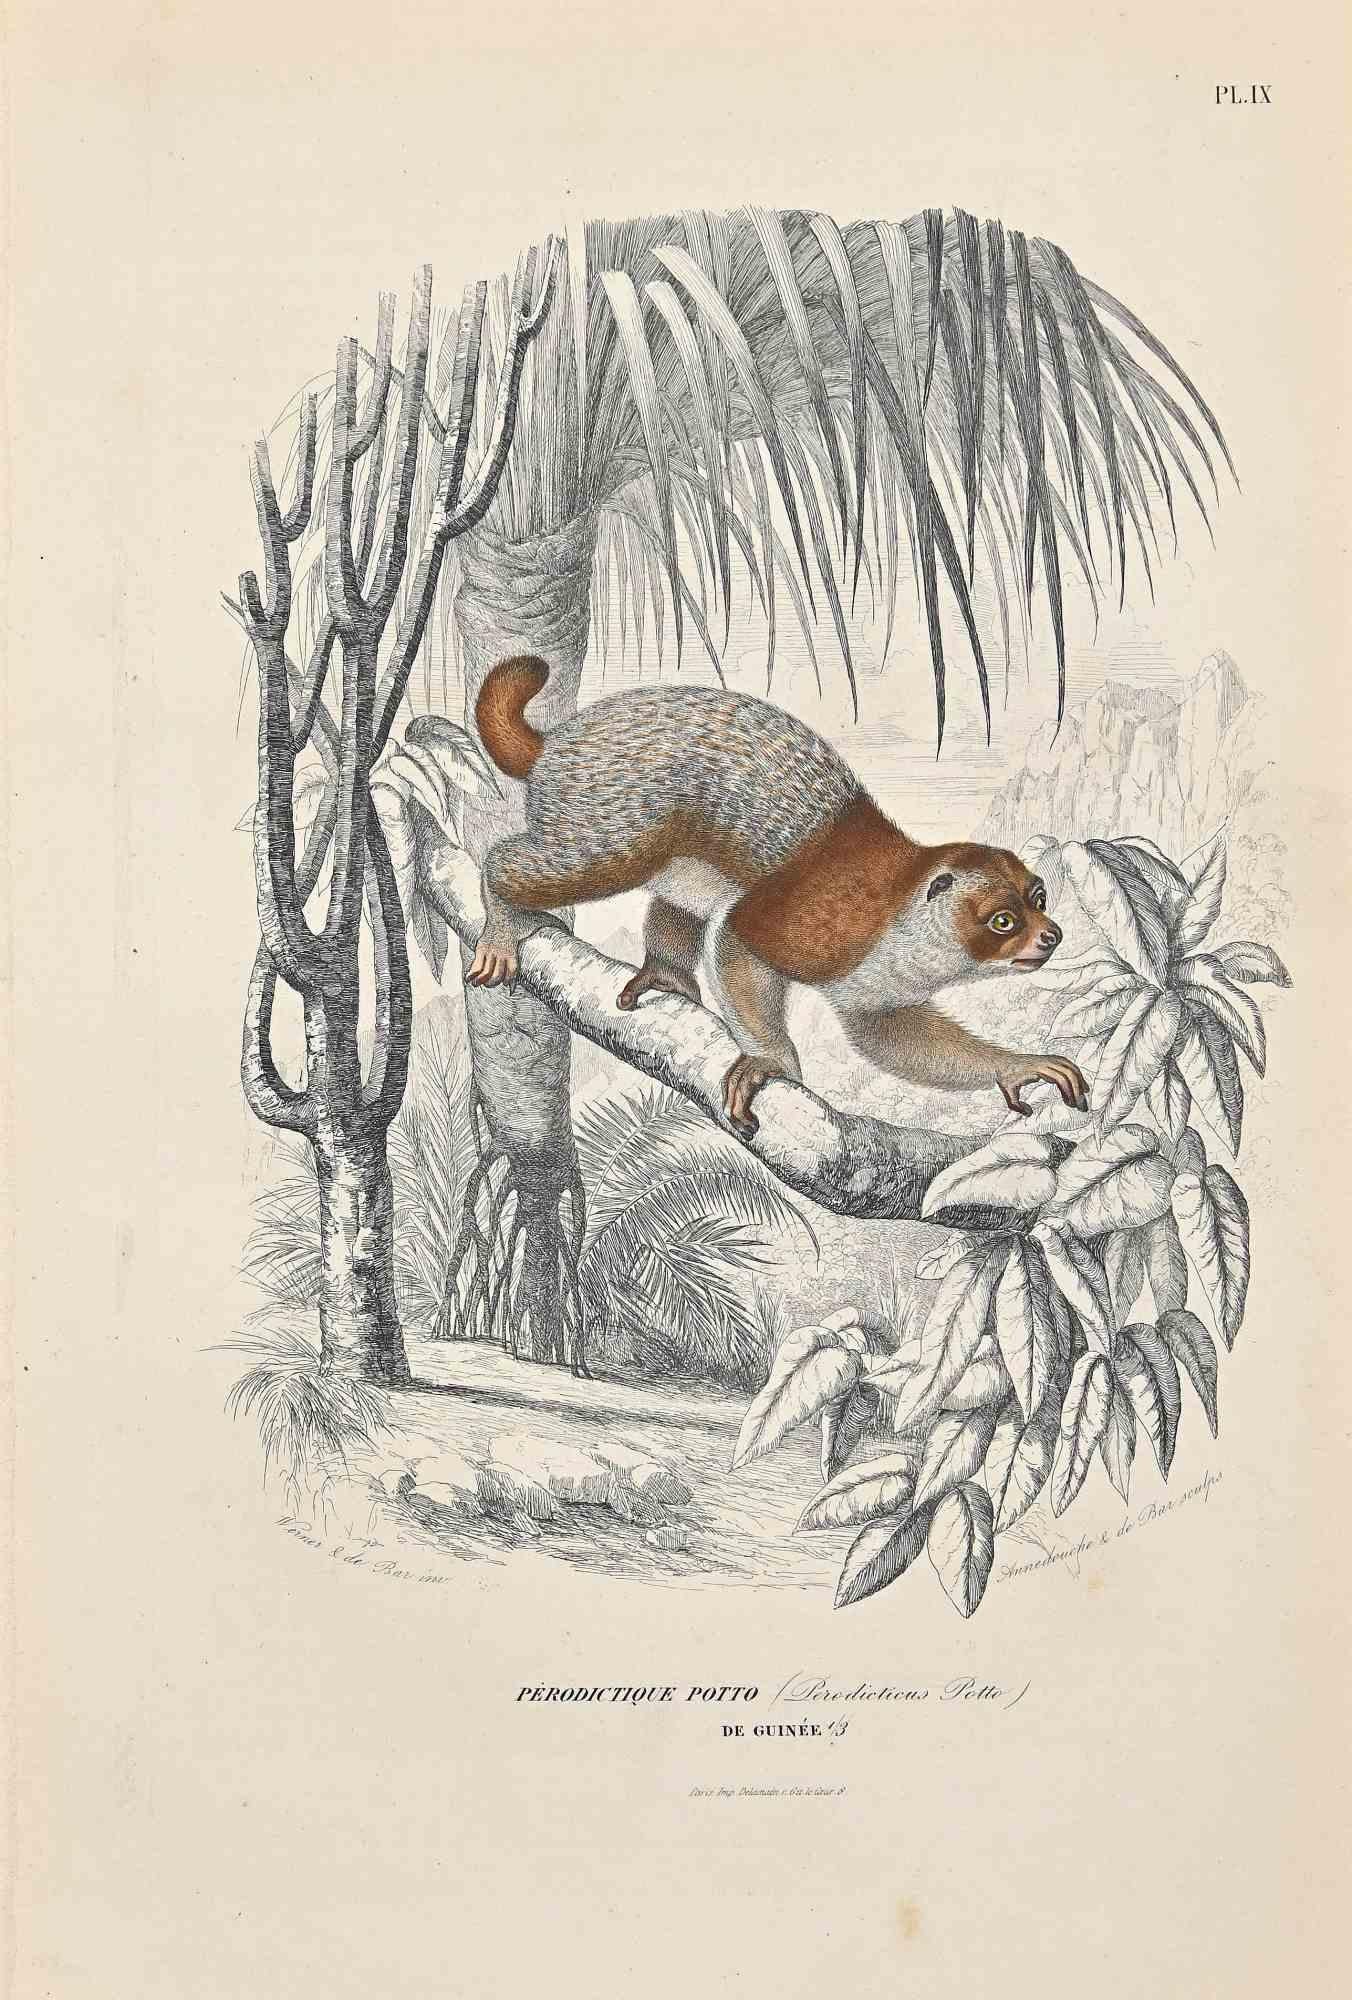 Potto is an original lithograph on ivory-colored paper, realized by Paul Gervais (1816-1879). The artwork is from The Series of "Les Trois Règnes de la Nature", and was published in 1854.

Good conditions except for some foxings.

Titled on the